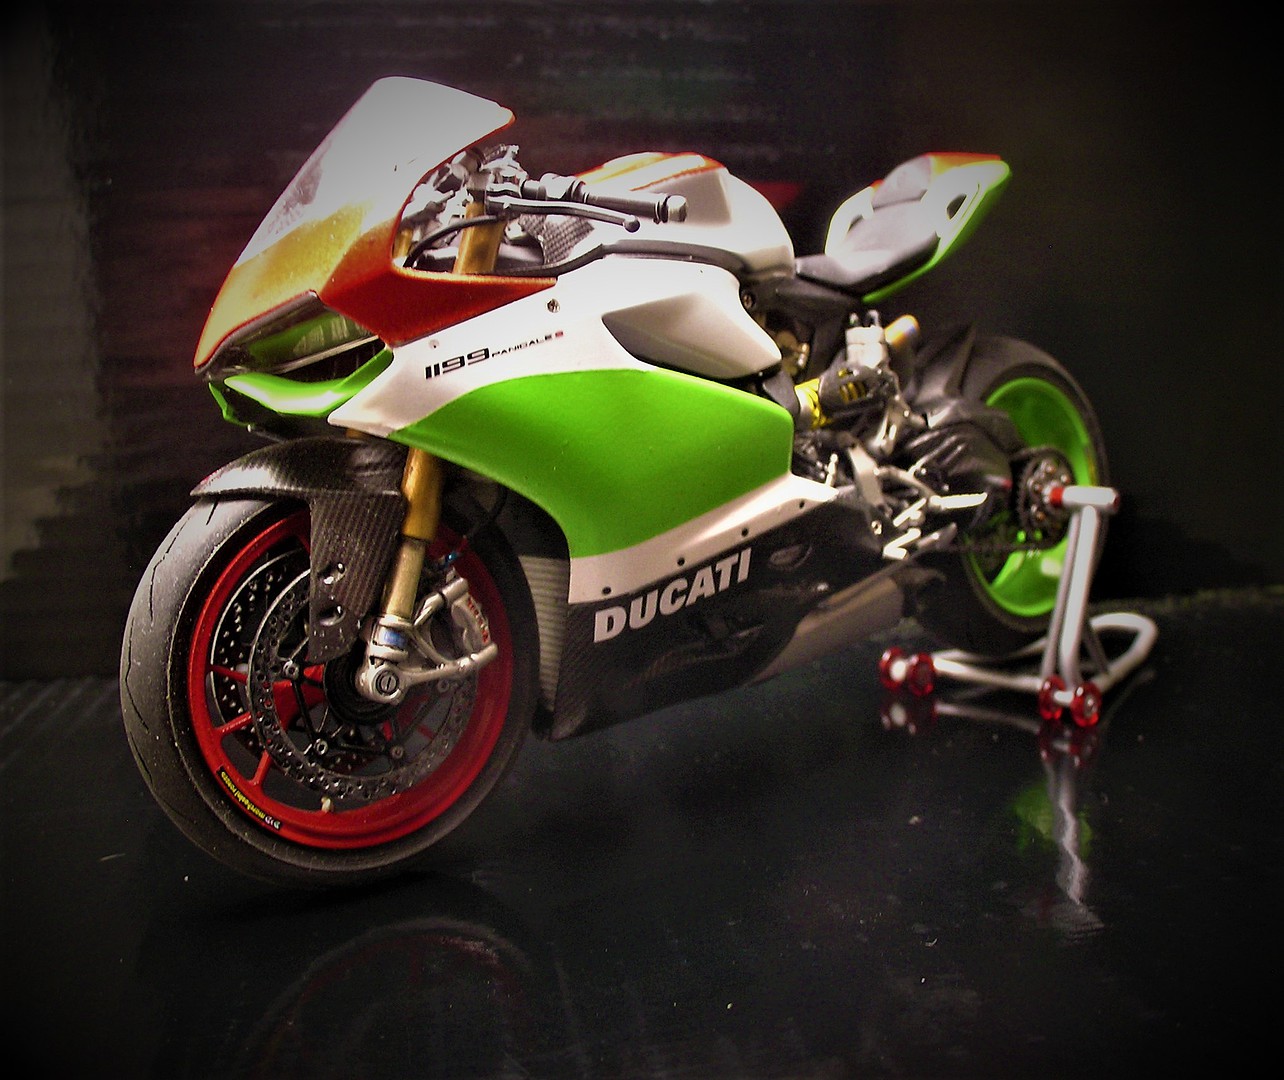 Tamiya 1//12 Ducati 1199 Panigale S Tricolore Motorcycle Tam14132 for sale online